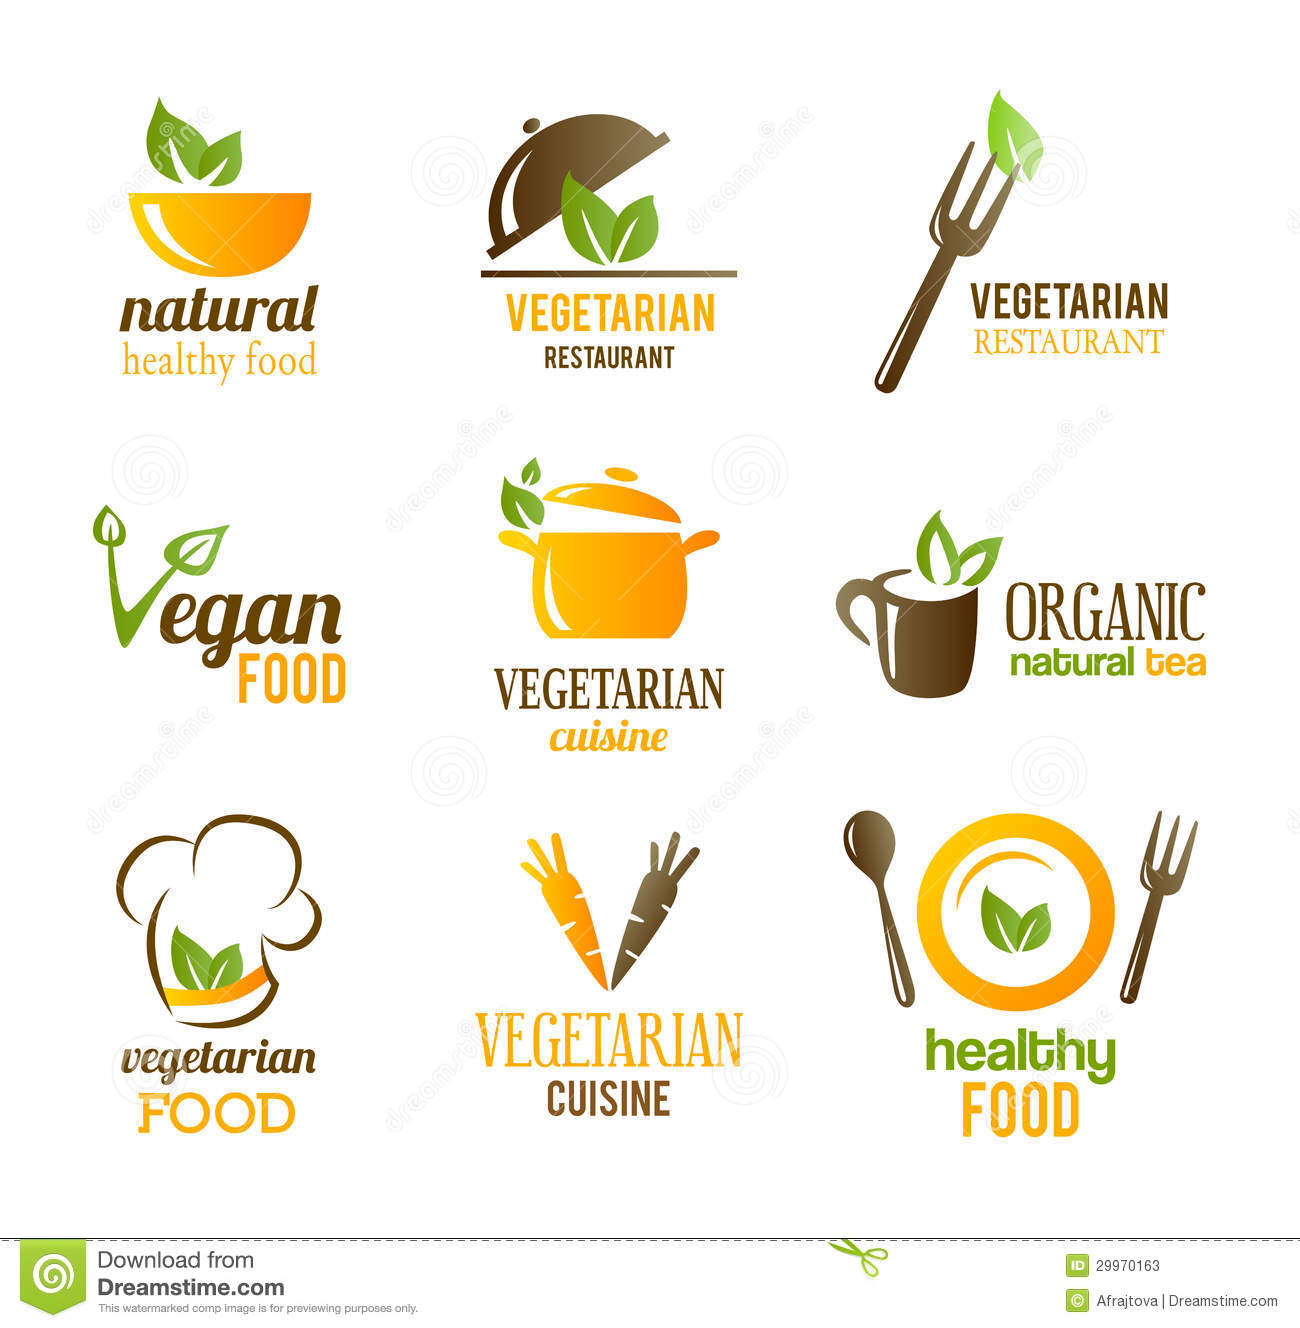 8 Vegetarian Food Icon Images